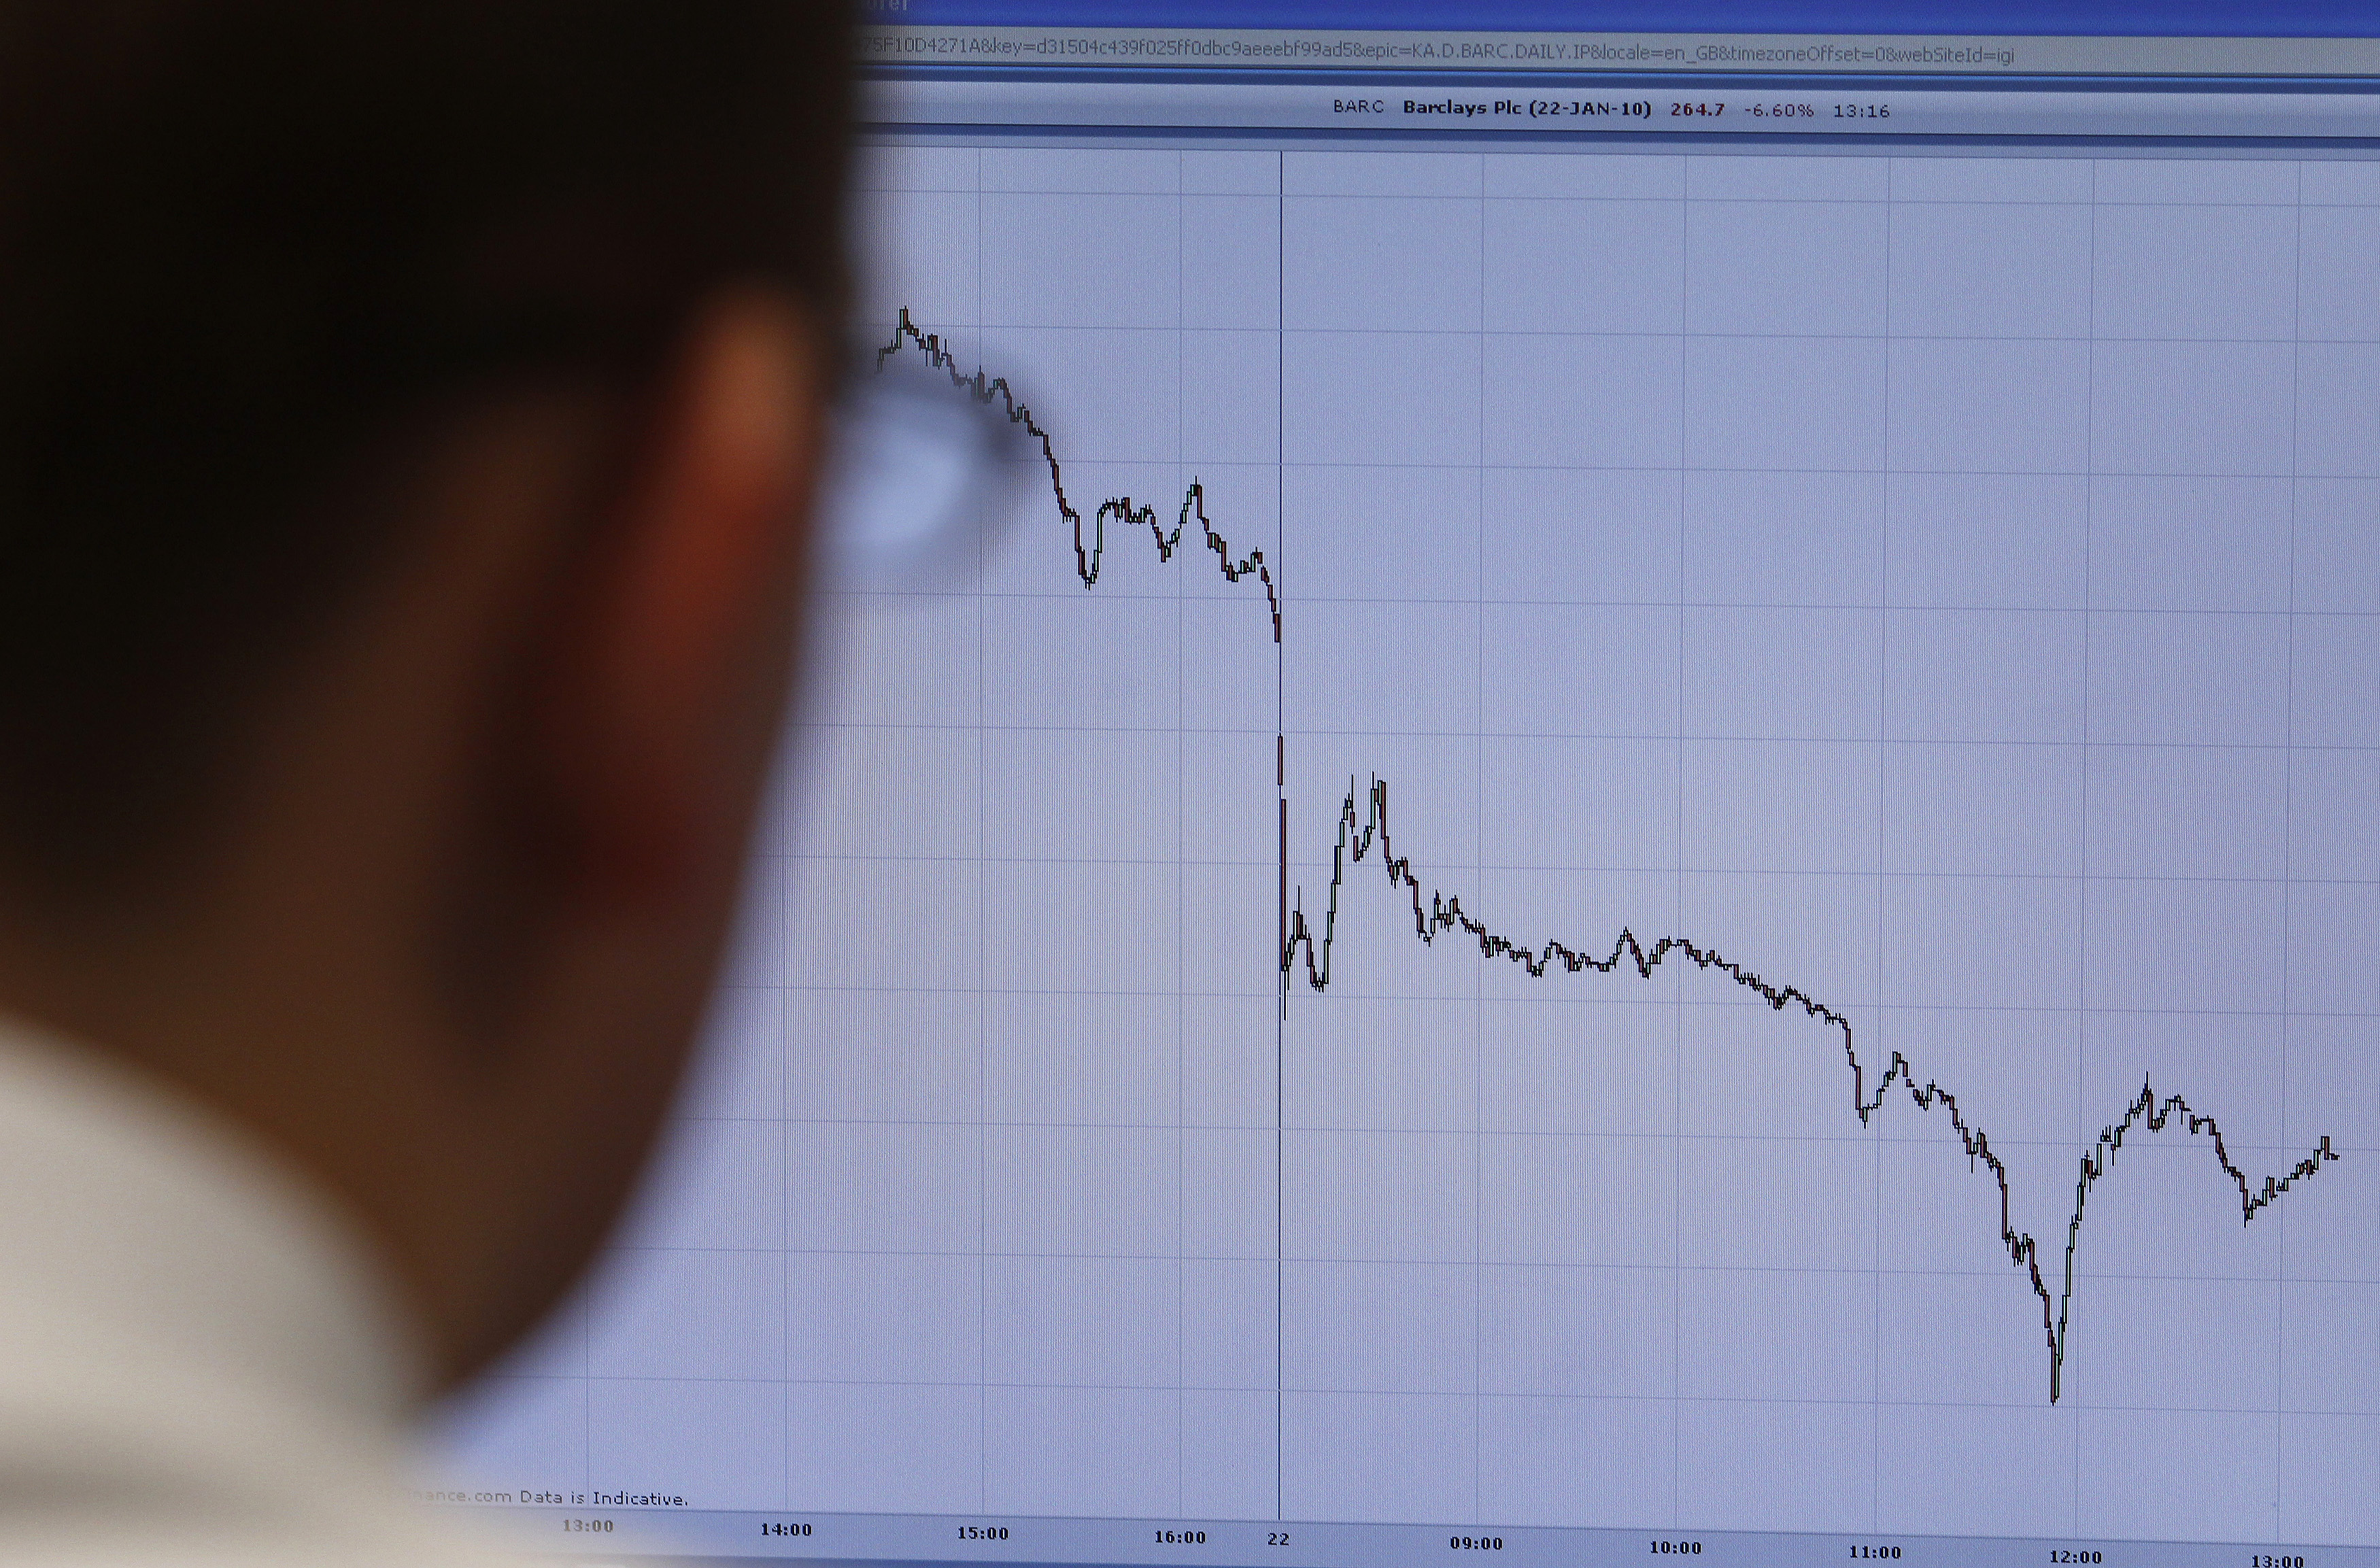 A trader poses in front of a screen on a trading floor in London